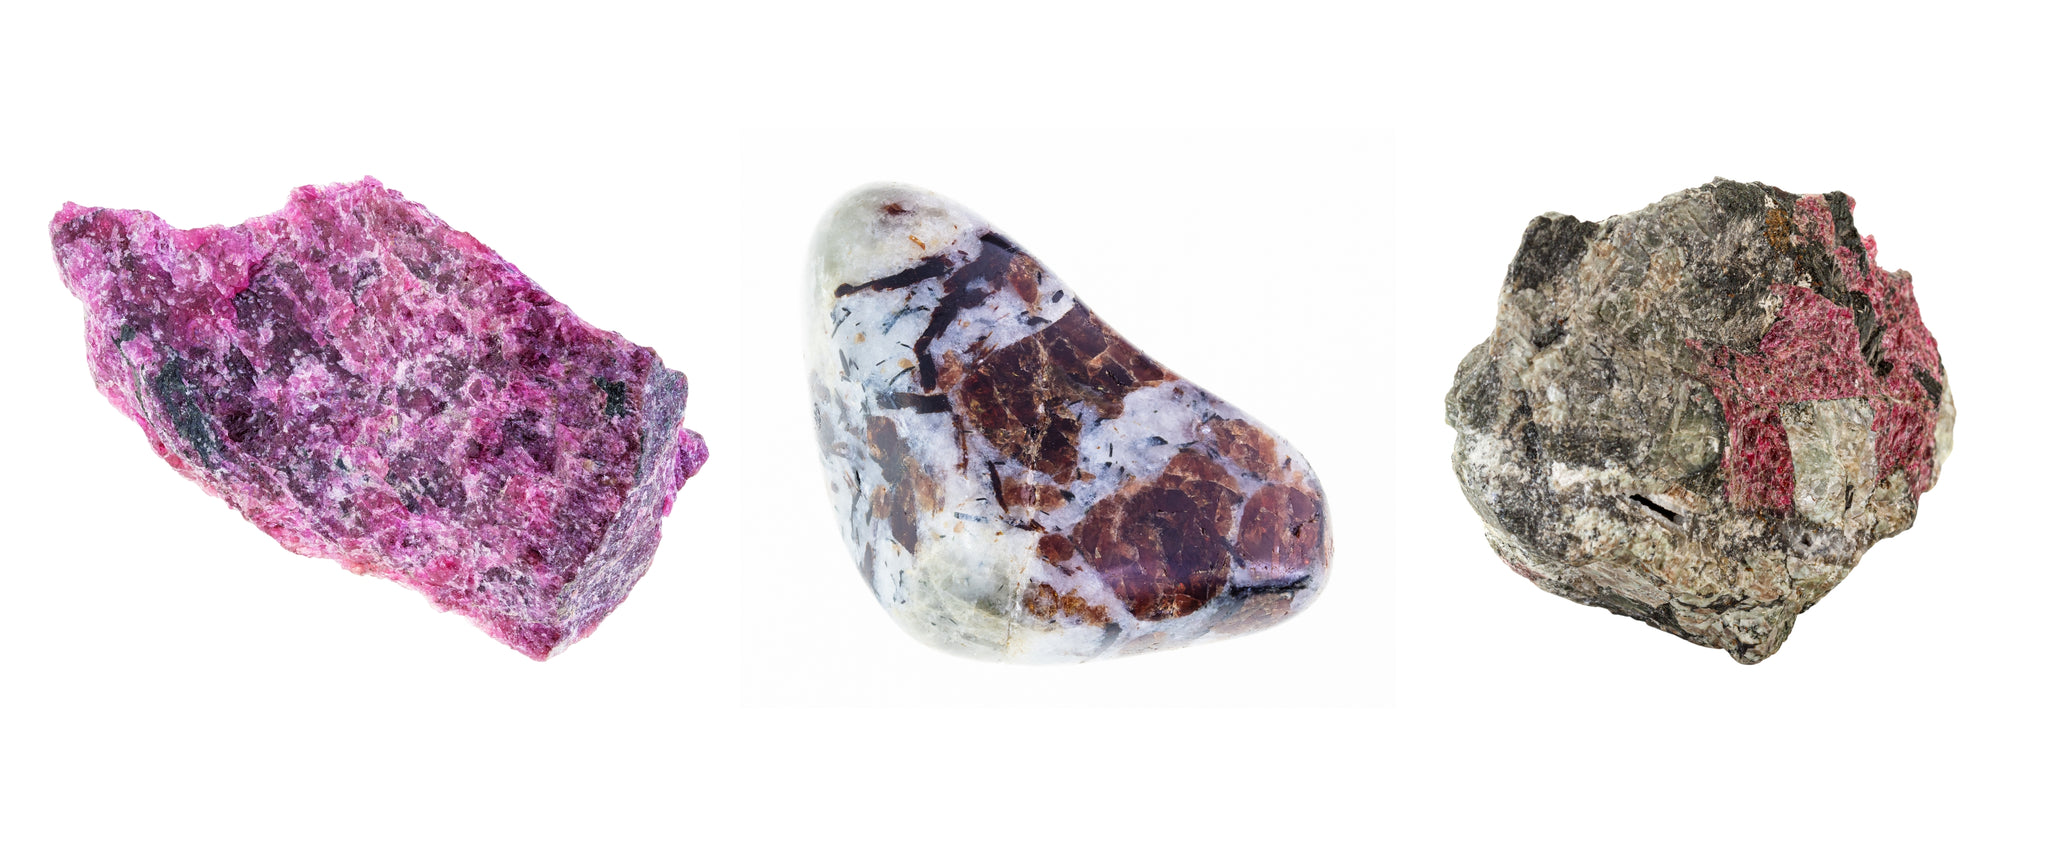 Eudialyte forms